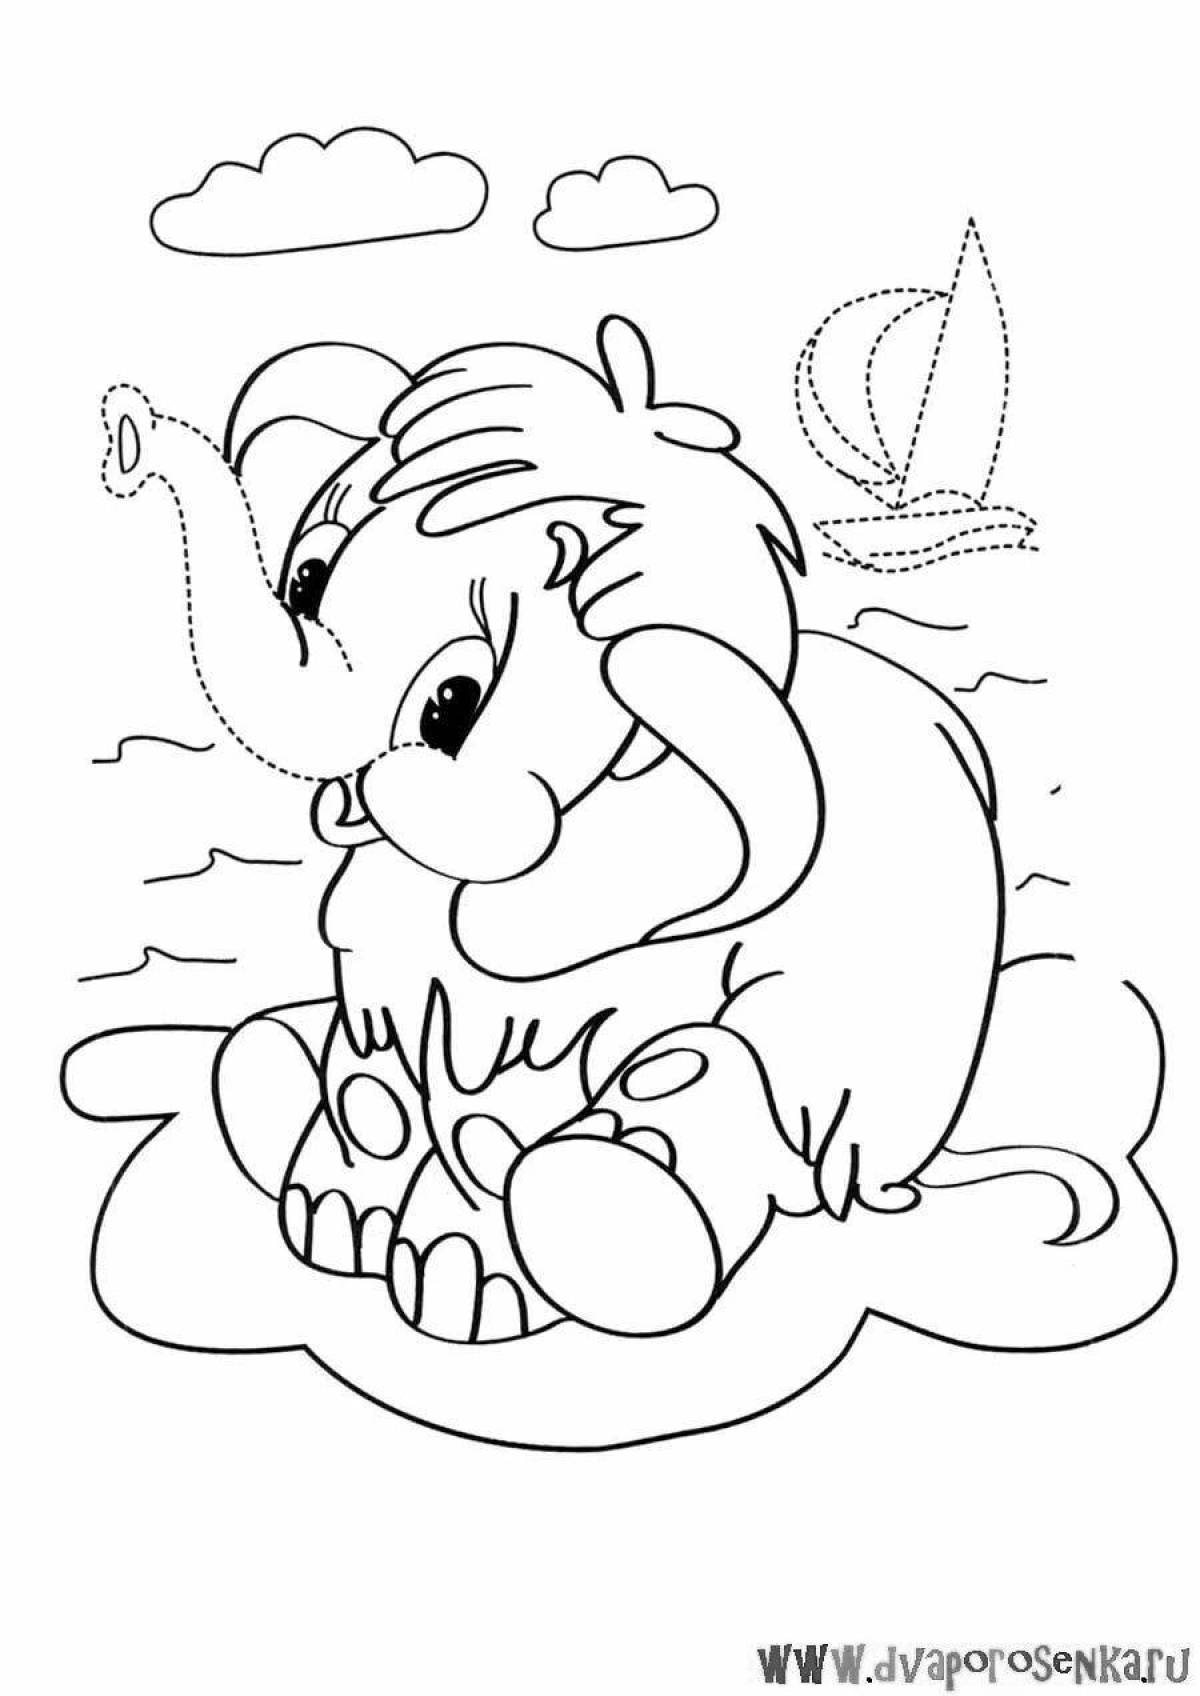 Coloring page glamor mammoth